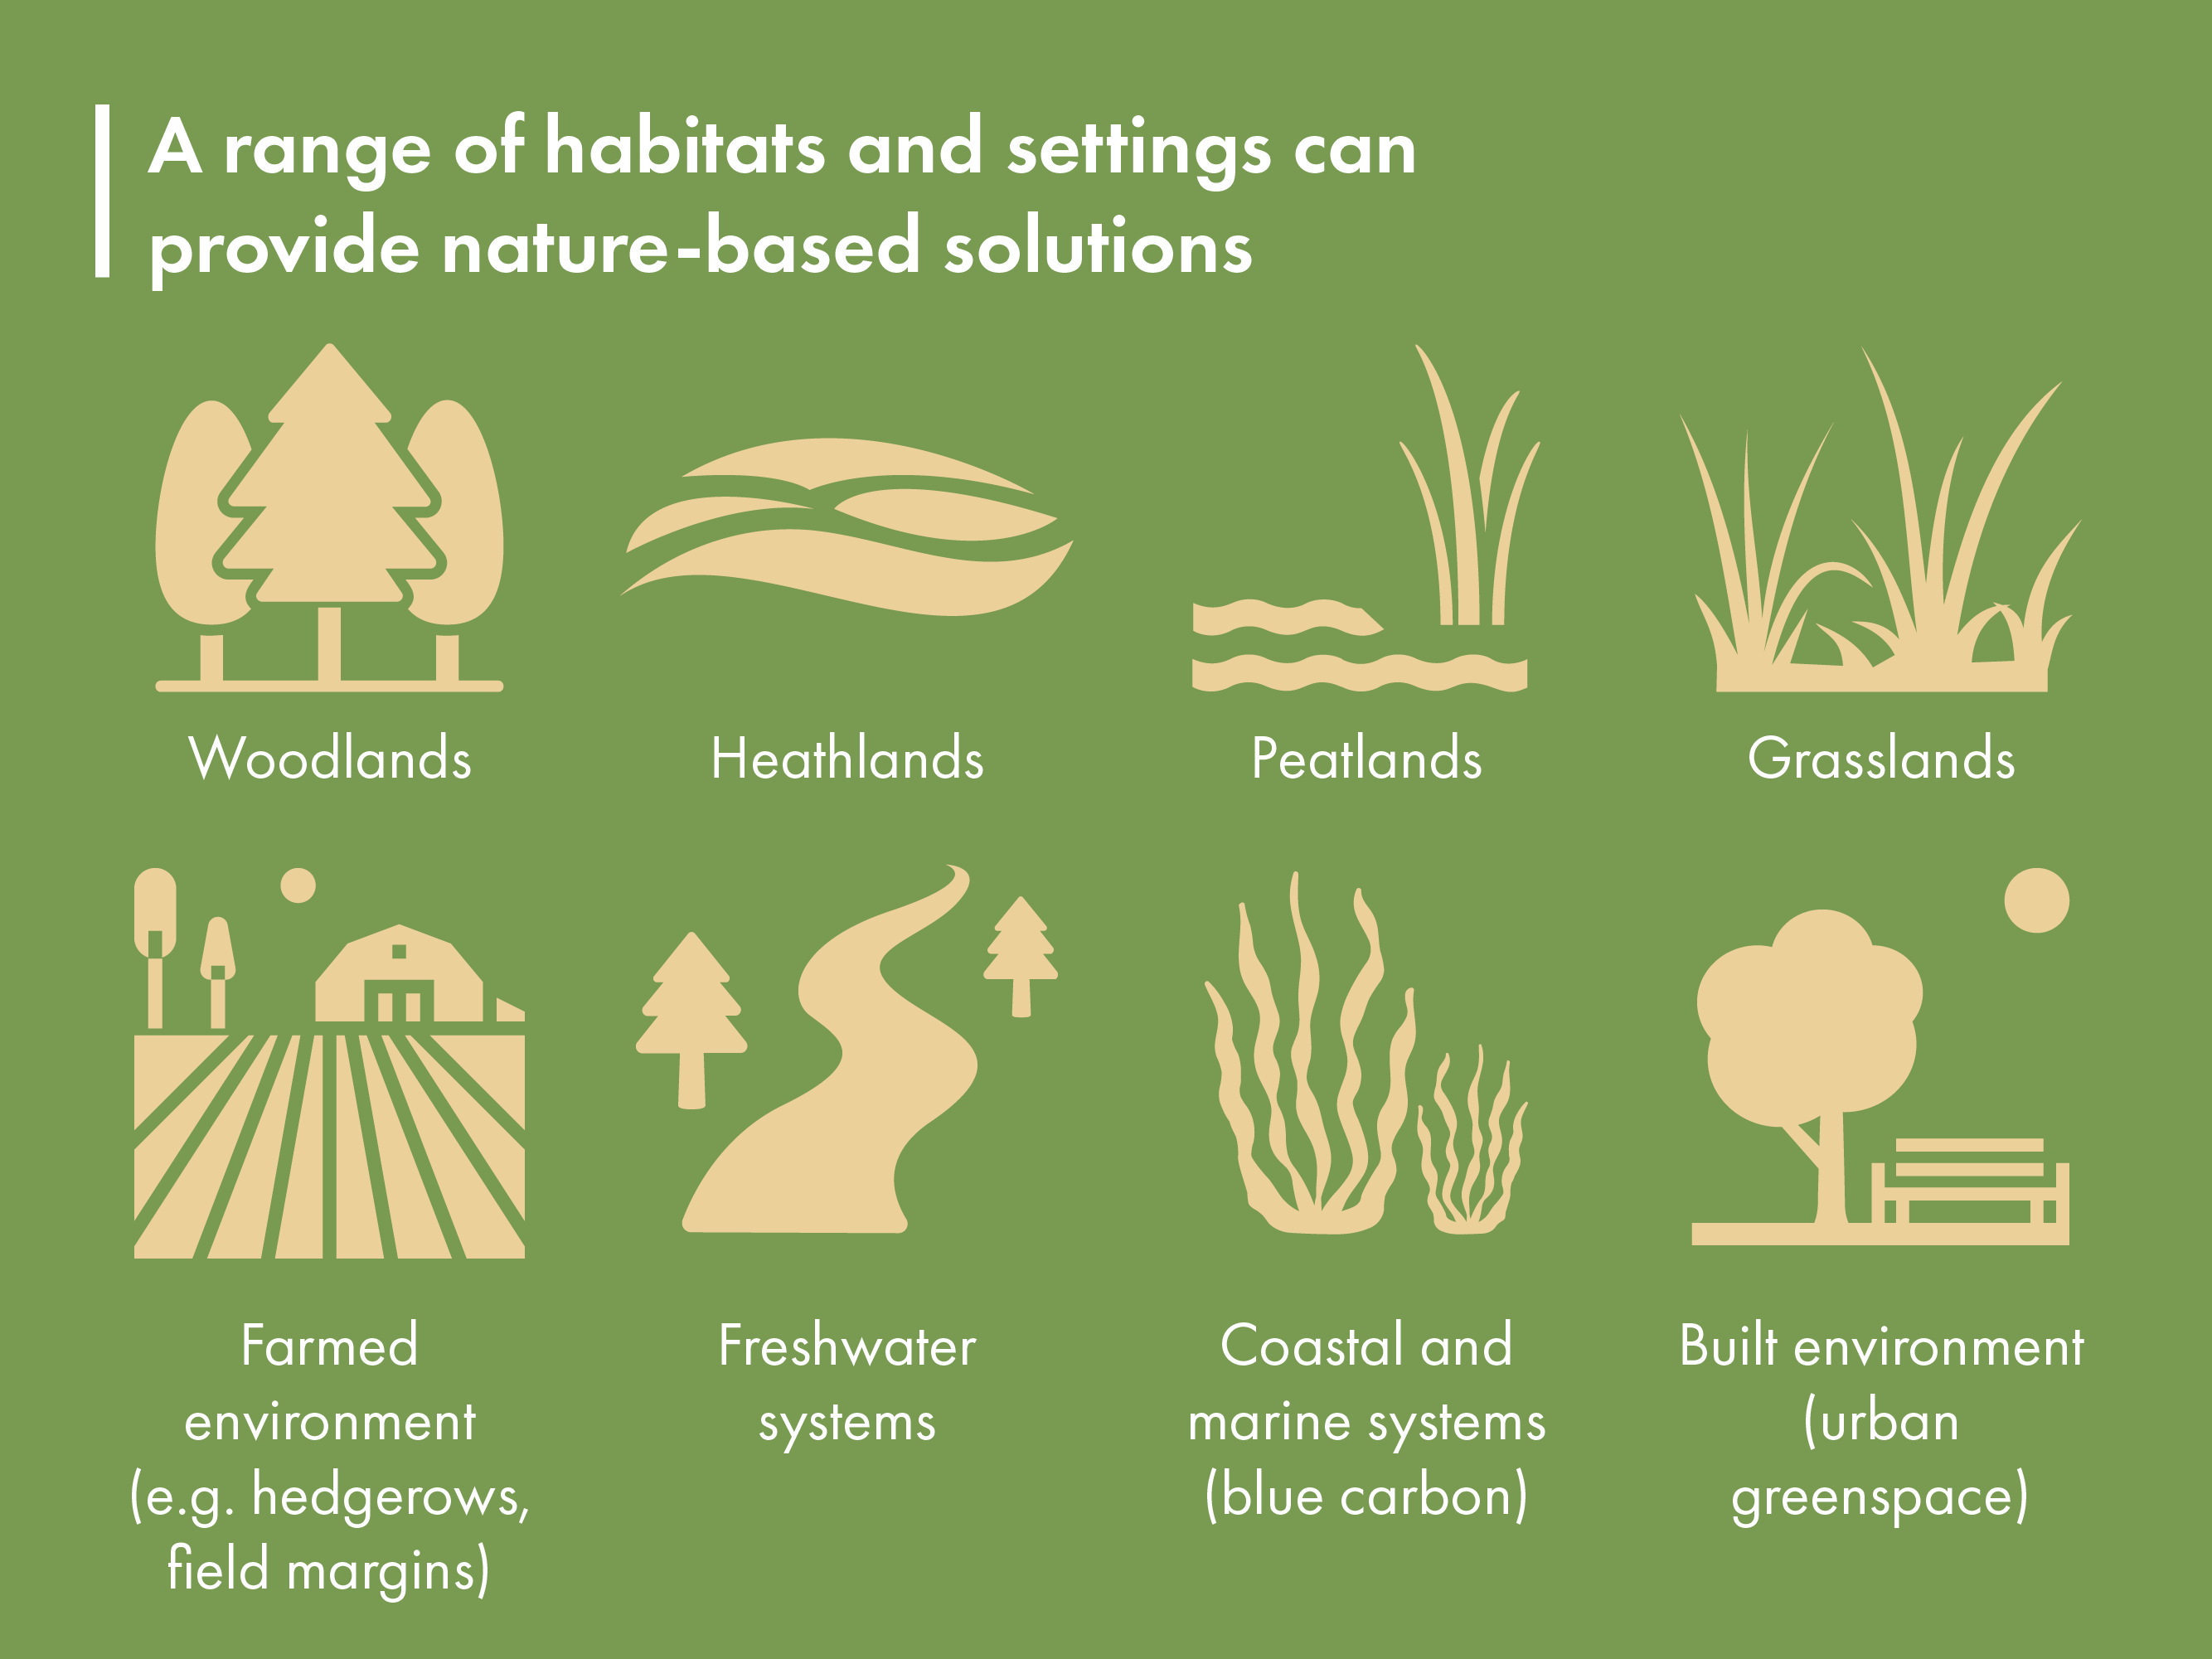 A range of habitats and settings can provide nature-based solutions. These include woodlands, heathlands, peatlands, grasslands, farmed environments, for example through hedgerows and field margins, freshwater systems, coastal and marine systems and urban greenspaces.